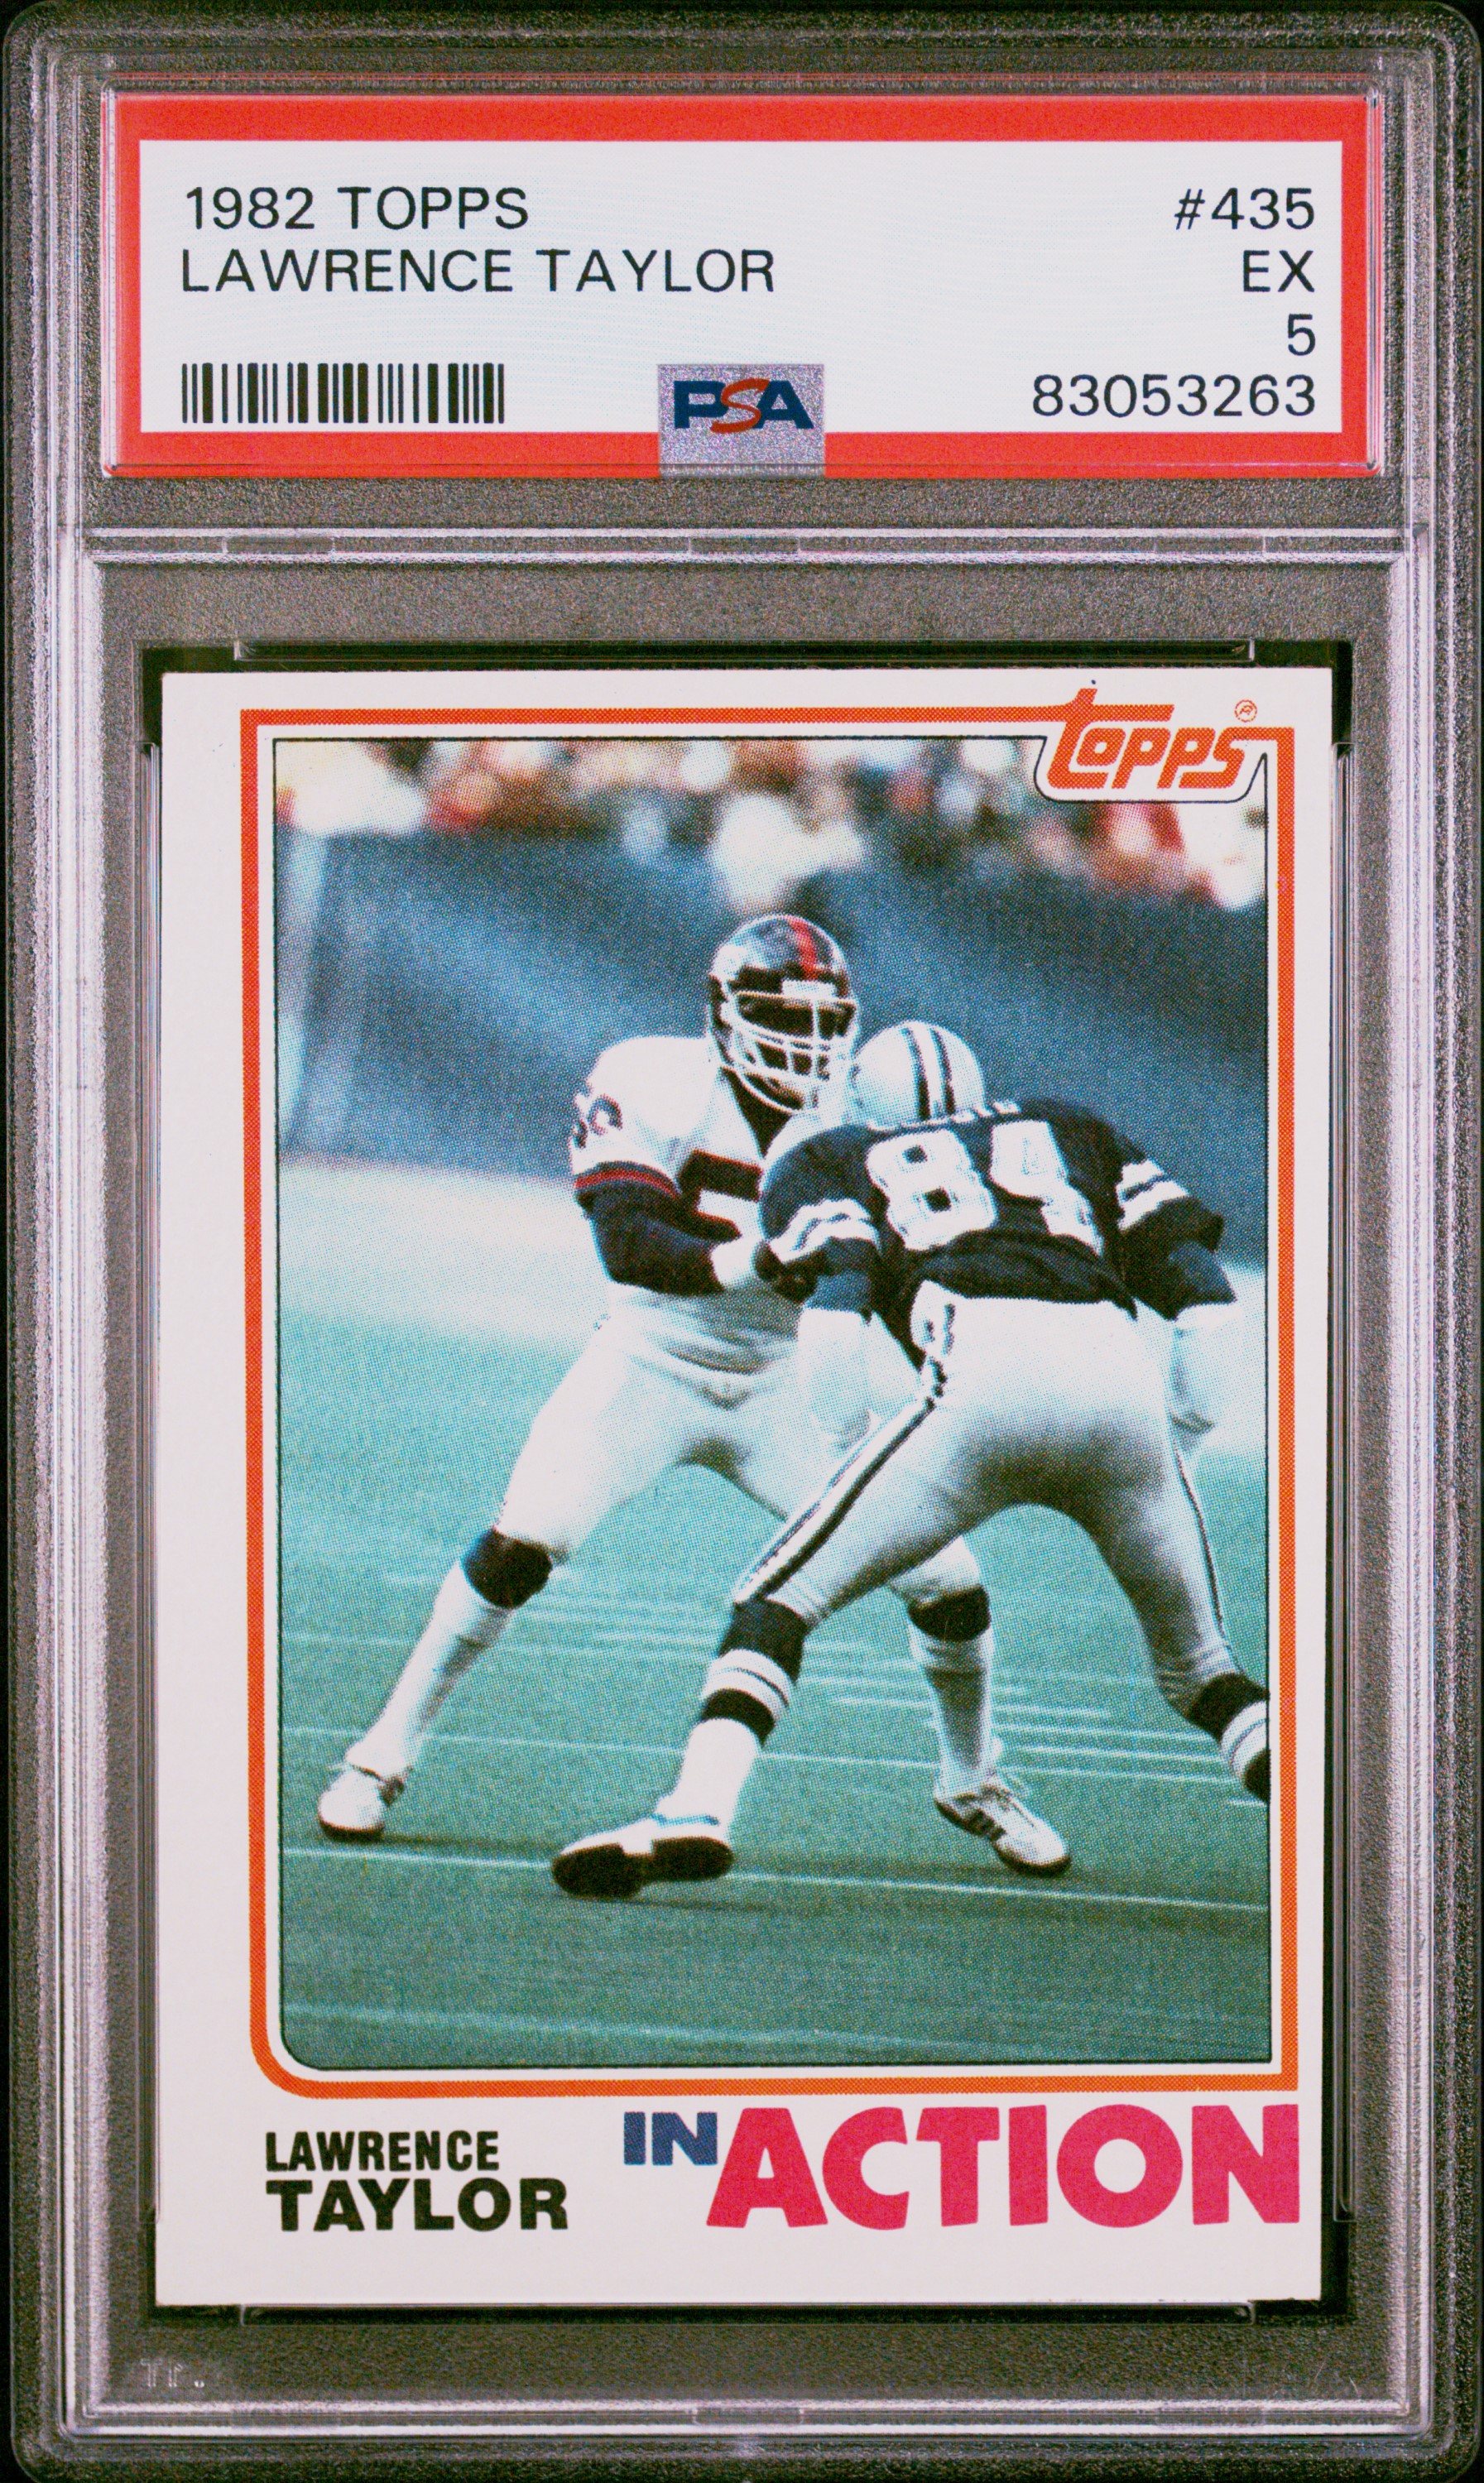 1982 Topps #435 Lawrence Taylor Rookie Card – PSA EX 5